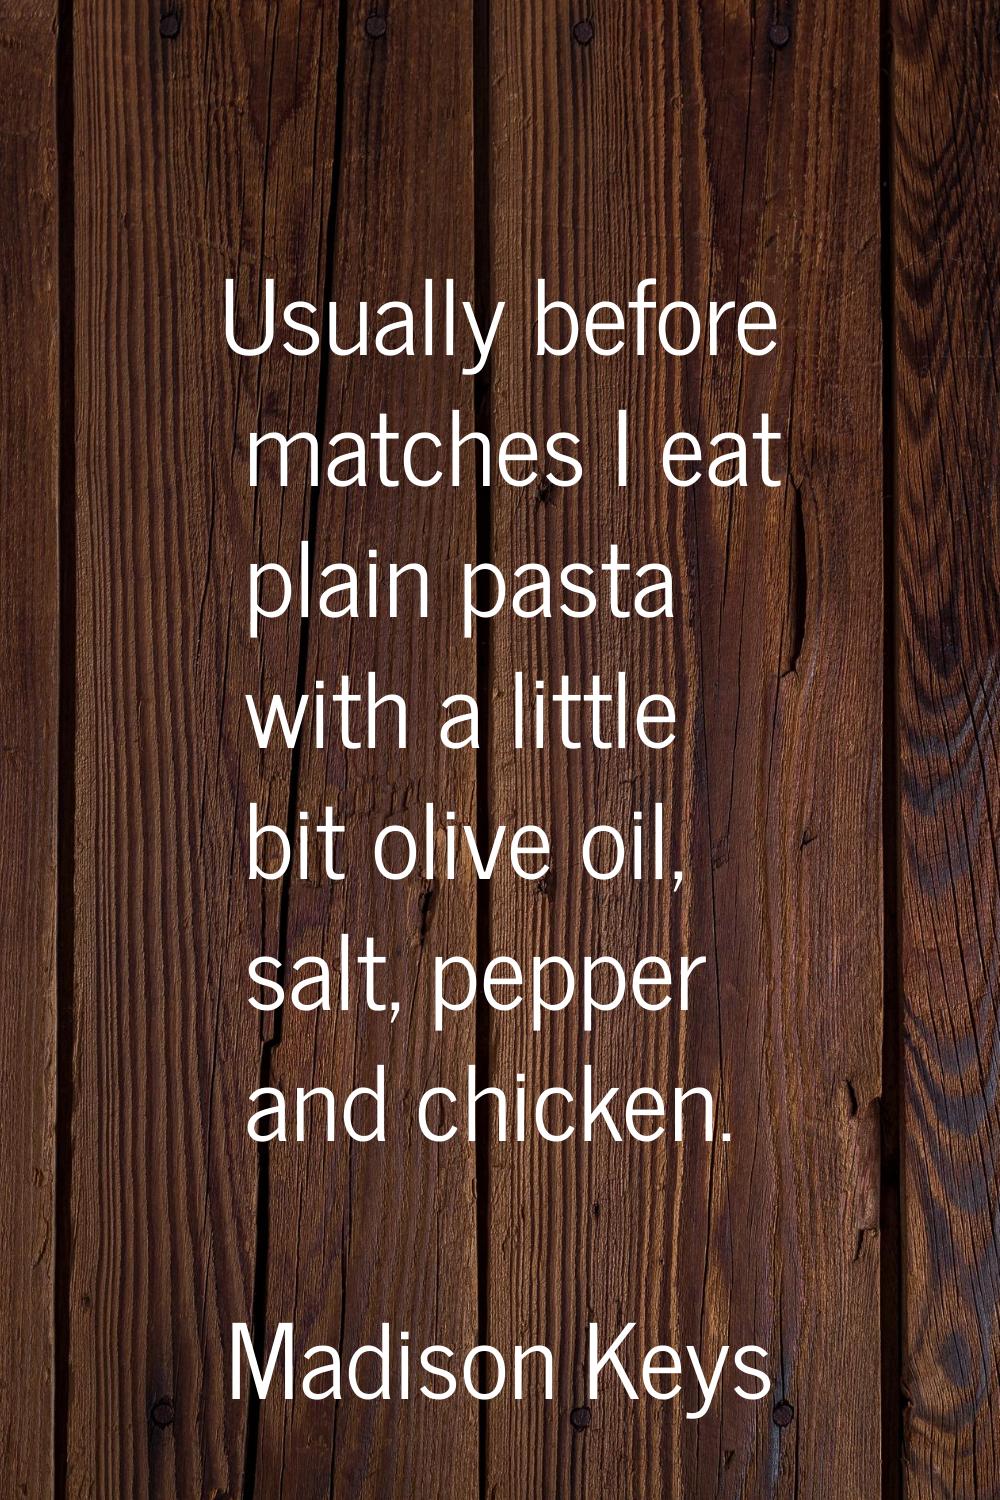 Usually before matches I eat plain pasta with a little bit olive oil, salt, pepper and chicken.